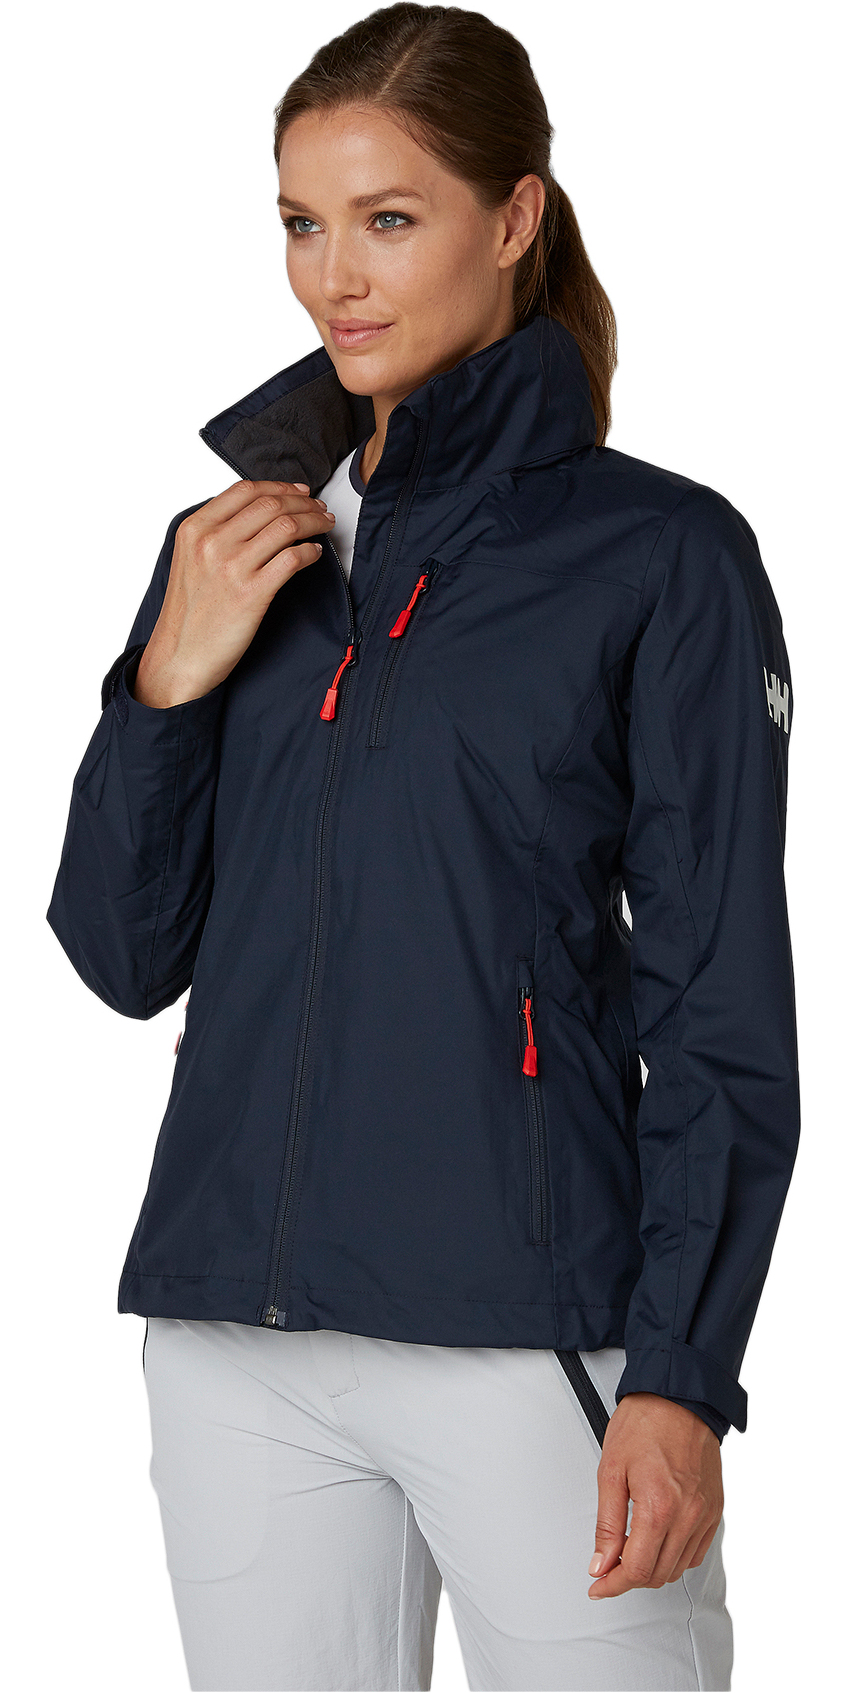 Download Helly Hansen Womens Jacket Hooded Crew Mid Layer 33887 ...